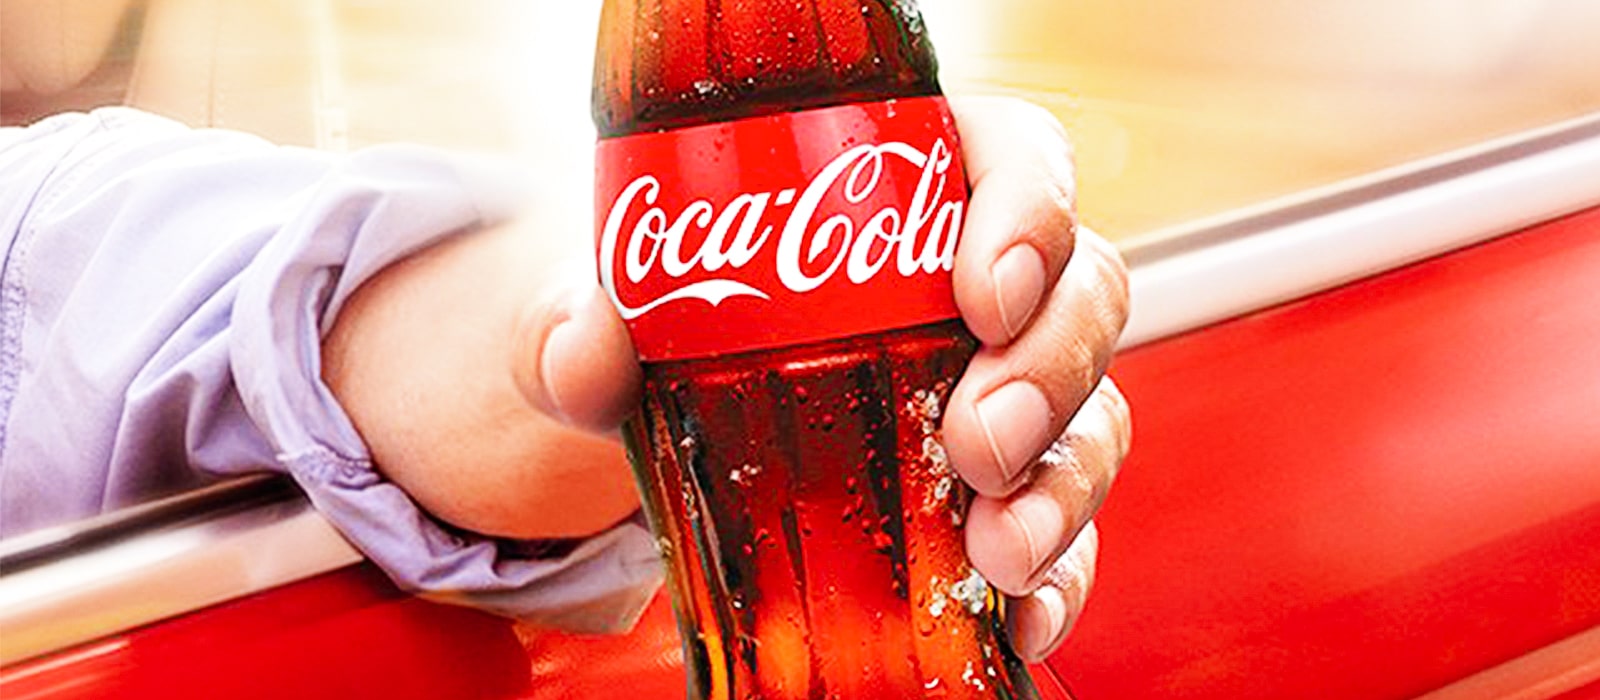 Detail of a hand holding a Coca-Cola Original bottle